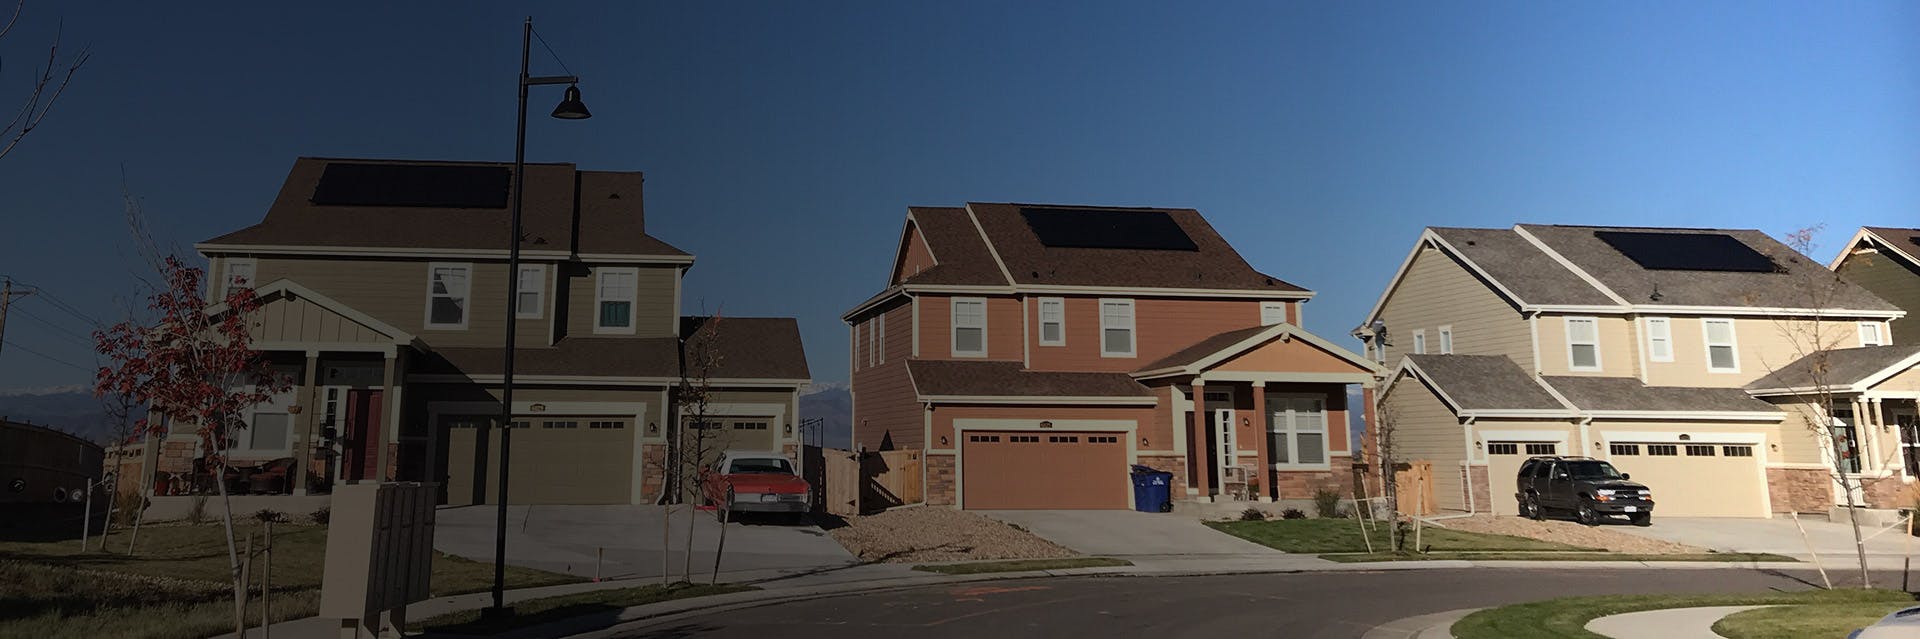 Save money on your energy bill with Solar Share in Chattanooga